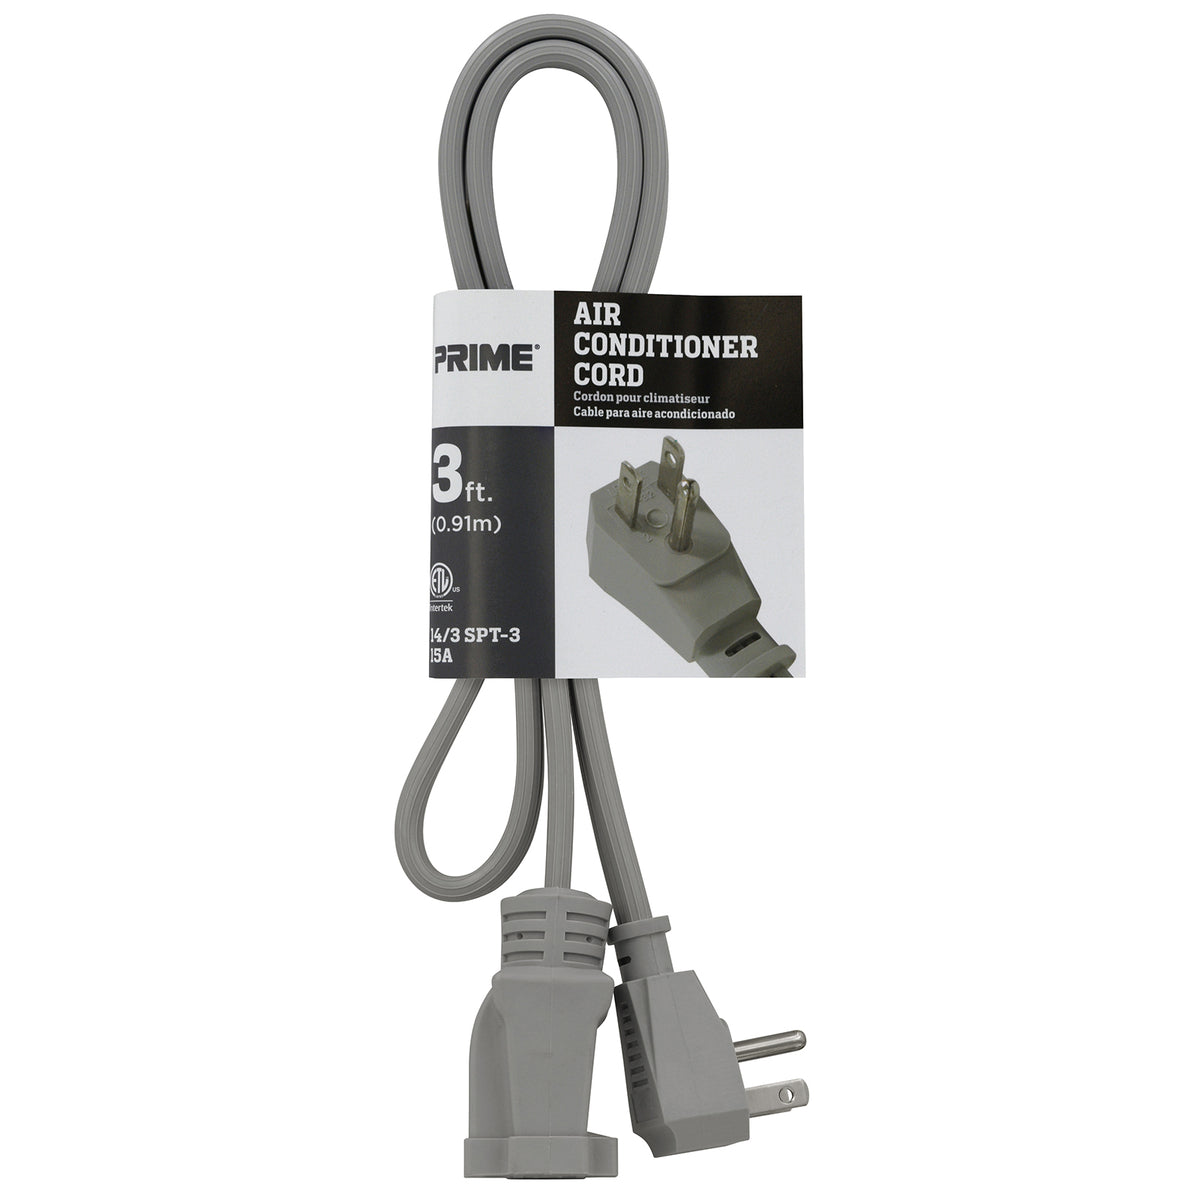 3ft 14/3 SPT-3 Air Conditioner Cord — Prime Wire & Cable Inc.